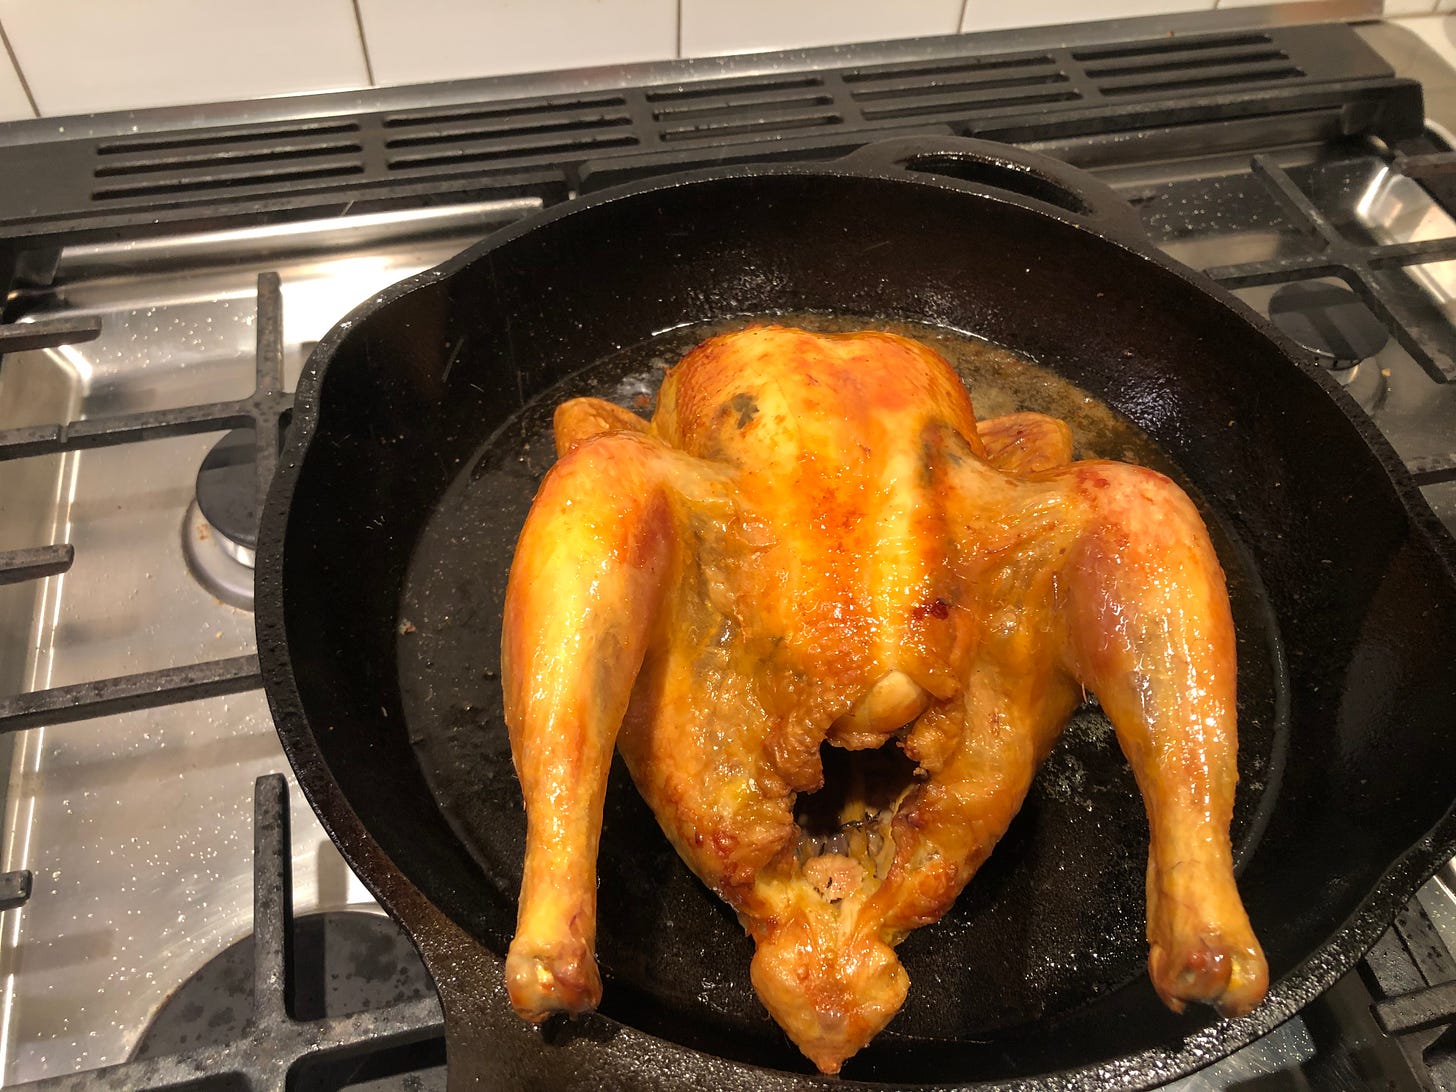 Finished chicken in pan